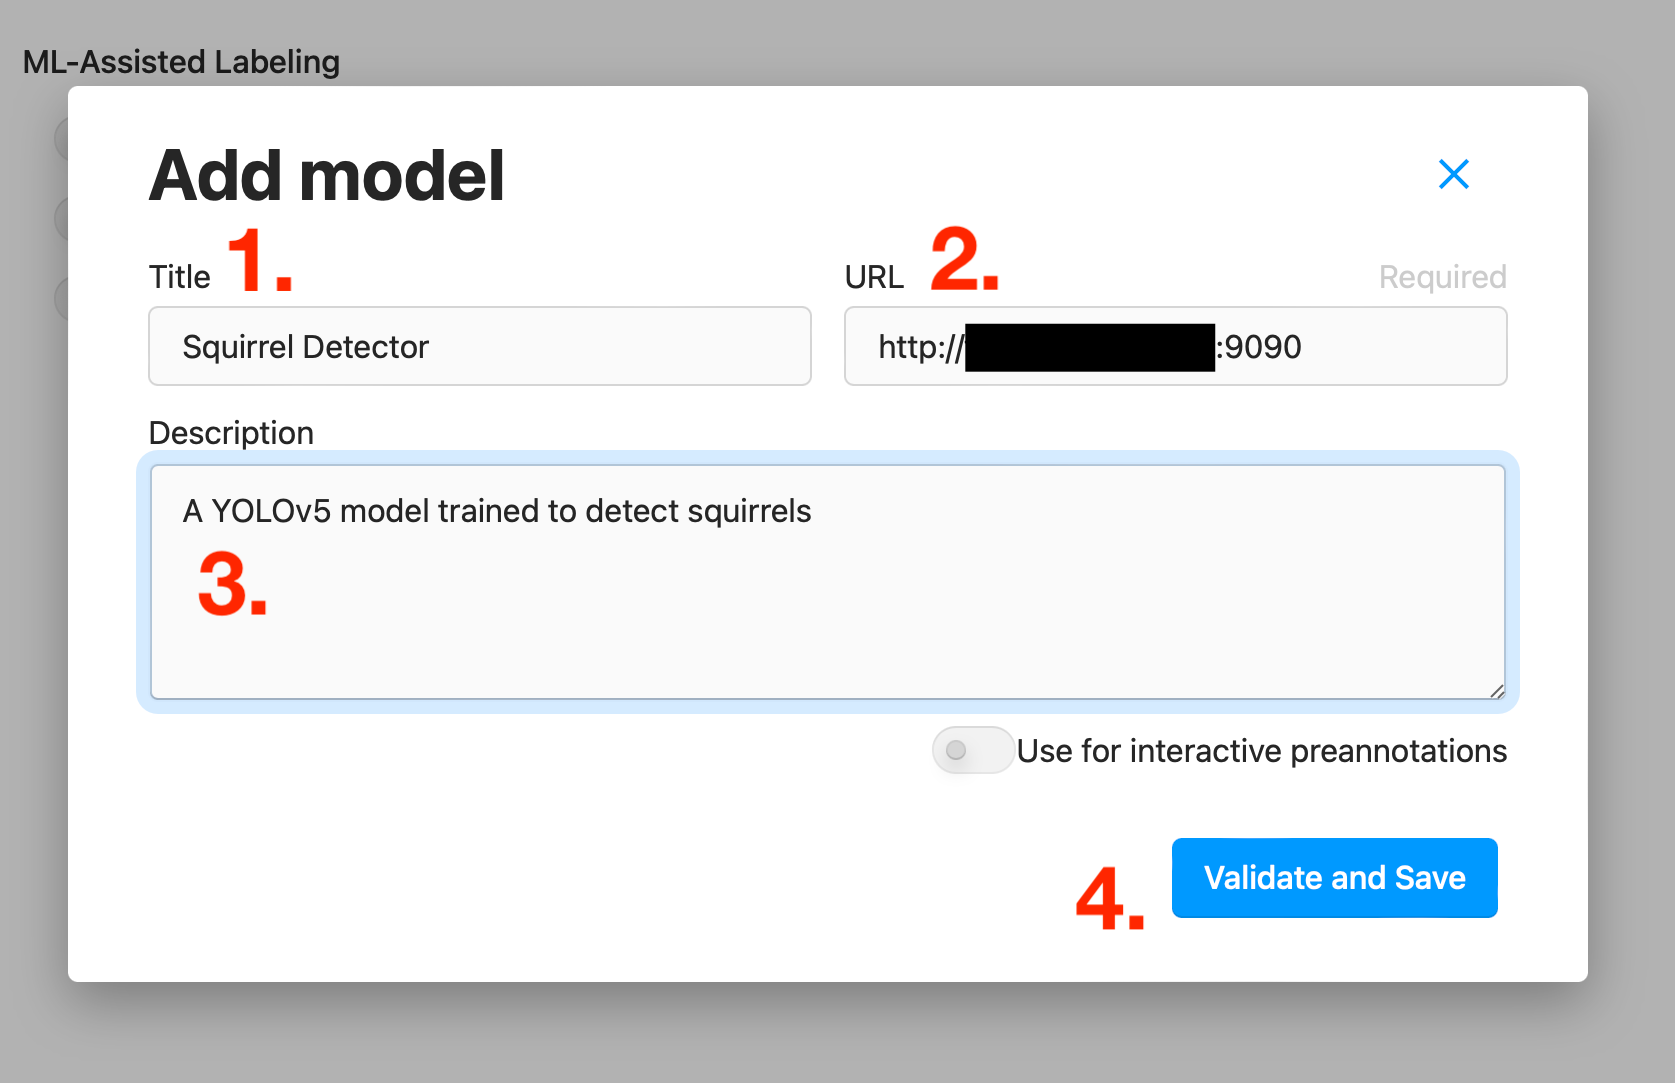 A screenshot of the Add model form with numbered fields for the areas that need input.